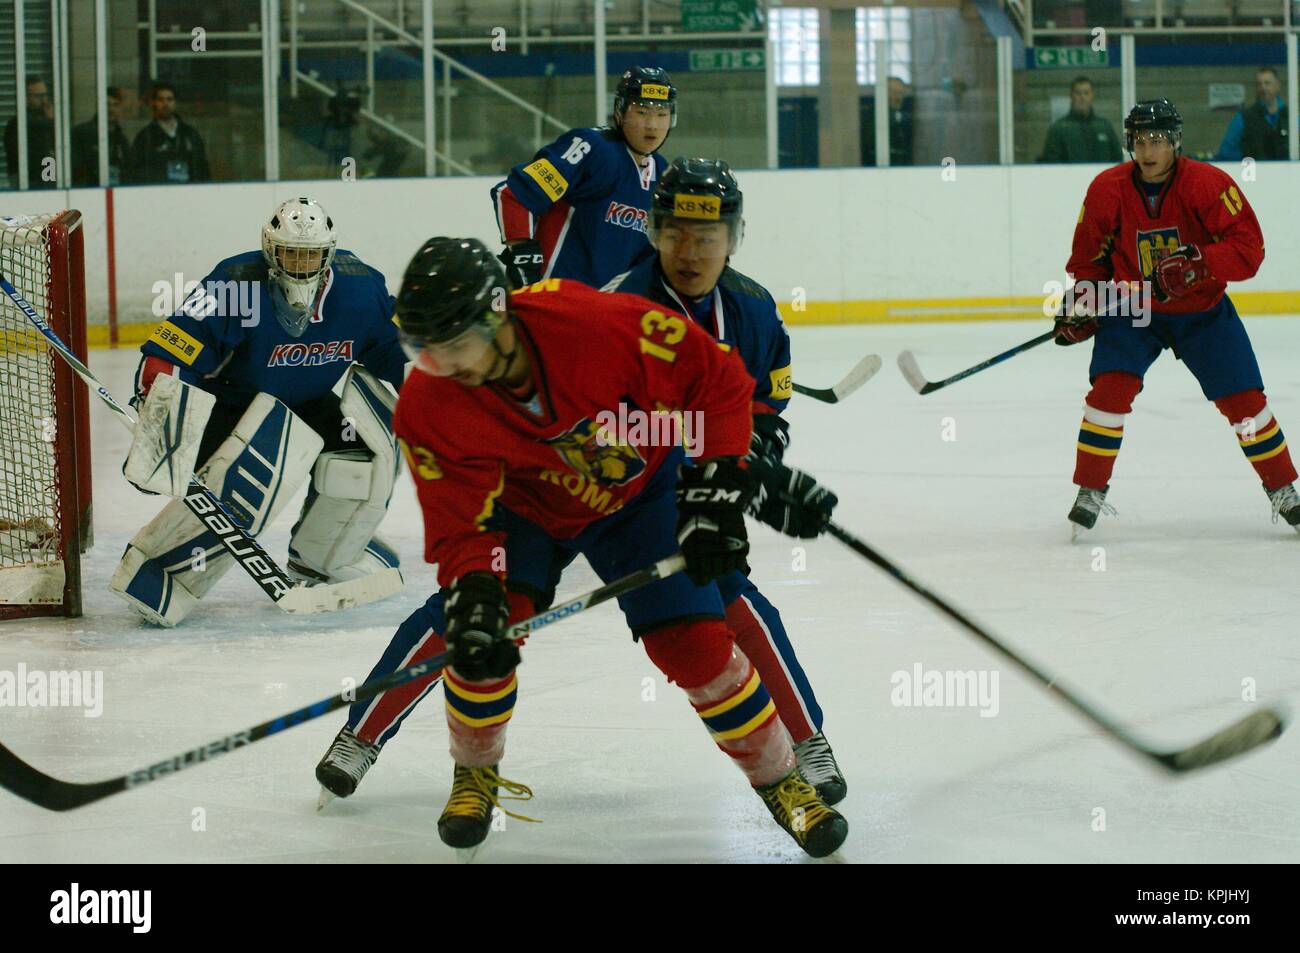 Dumfries, Scotland, 16 December 2017. Rajmund Marton, number 13, playing for Romania against Korea in the 2018 IIHF Ice Hockey U20 World Championship Division II, Group A, match at Dumfries. Credit: Colin Edwards/Alamy Live News. Stock Photo